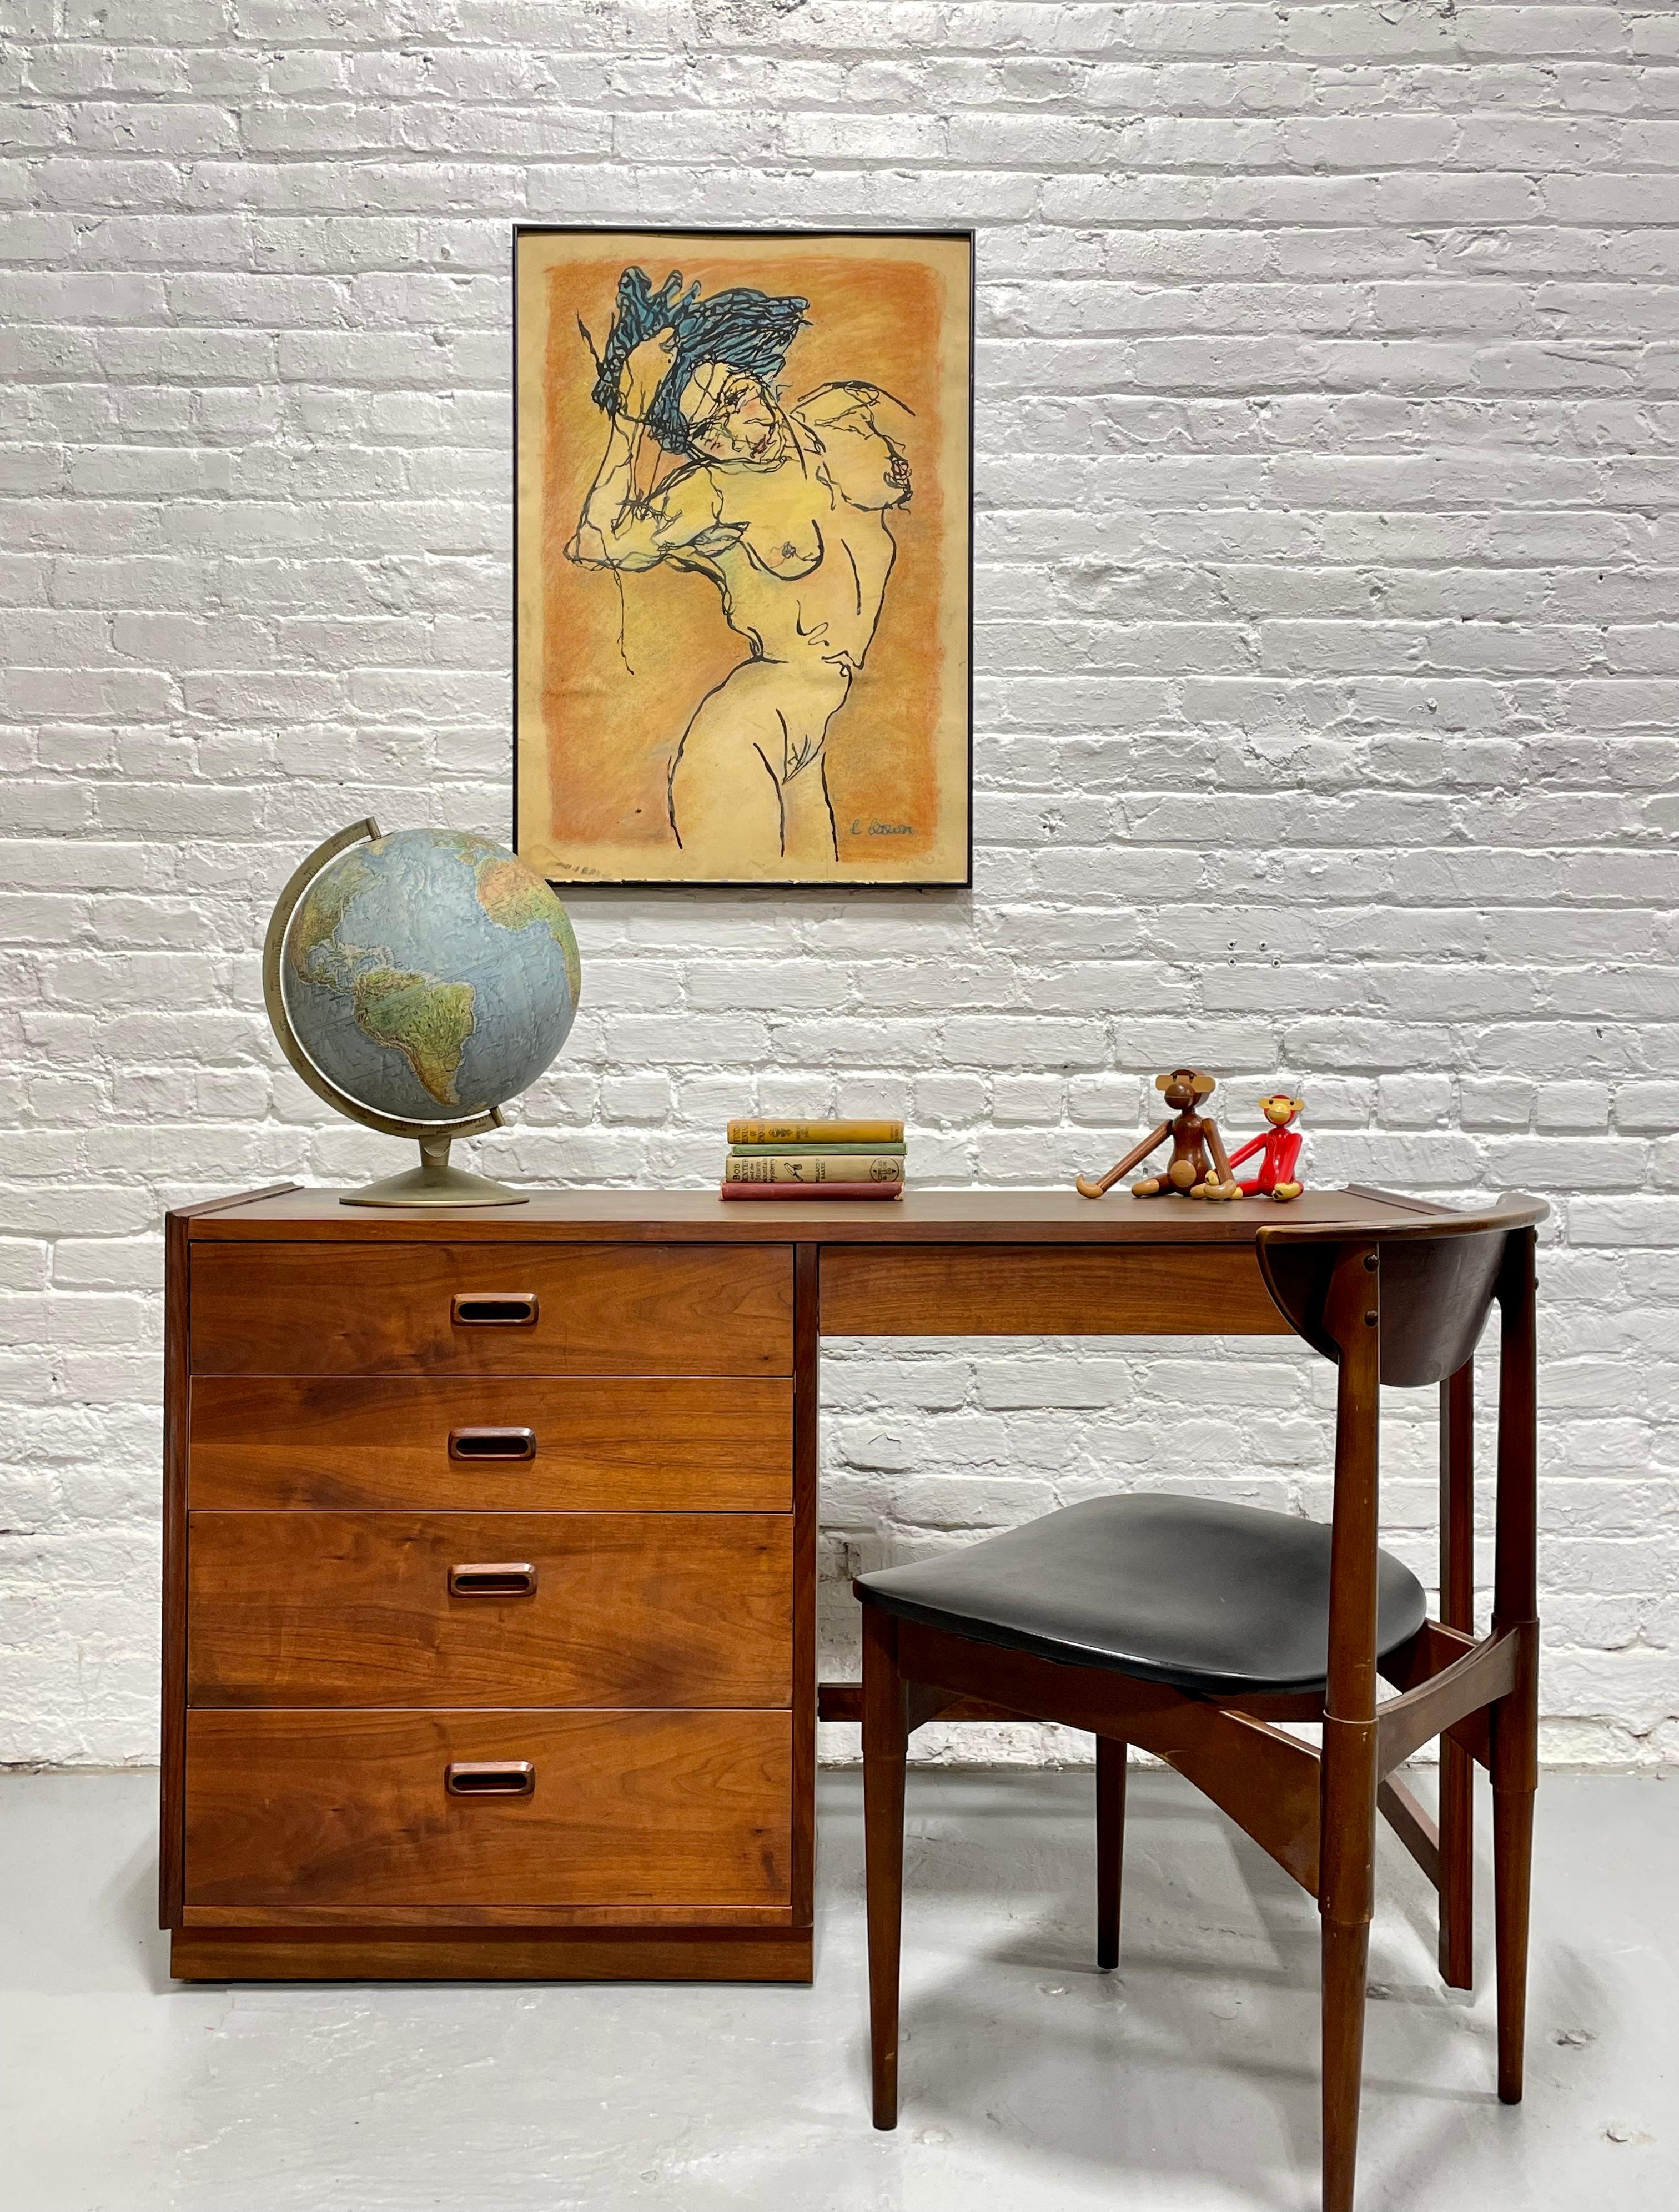 Mid Century Modern Walnut Desk by Founders Furniture Co., c. 1960's. Featuring a total of five dovetailed drawers with sculpted hand pulls and a laminate woodgrain tabletop, perfect for withstanding the wear and tear of a work surface. The back is